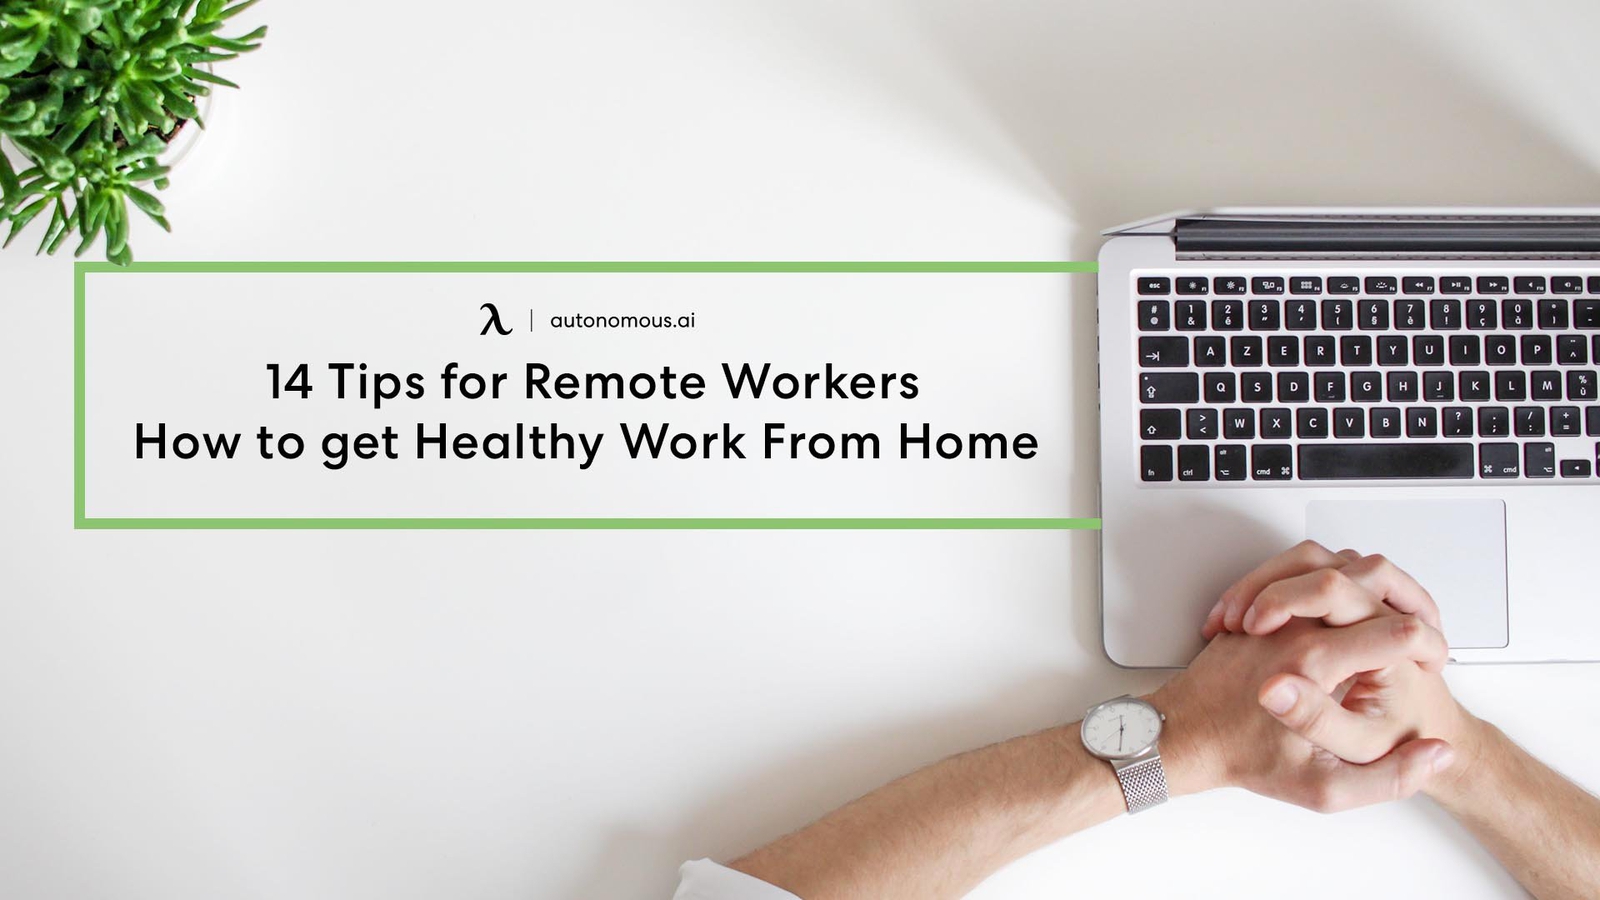 14 Tips for Remote Workers - How To Get Healthy Work From Home